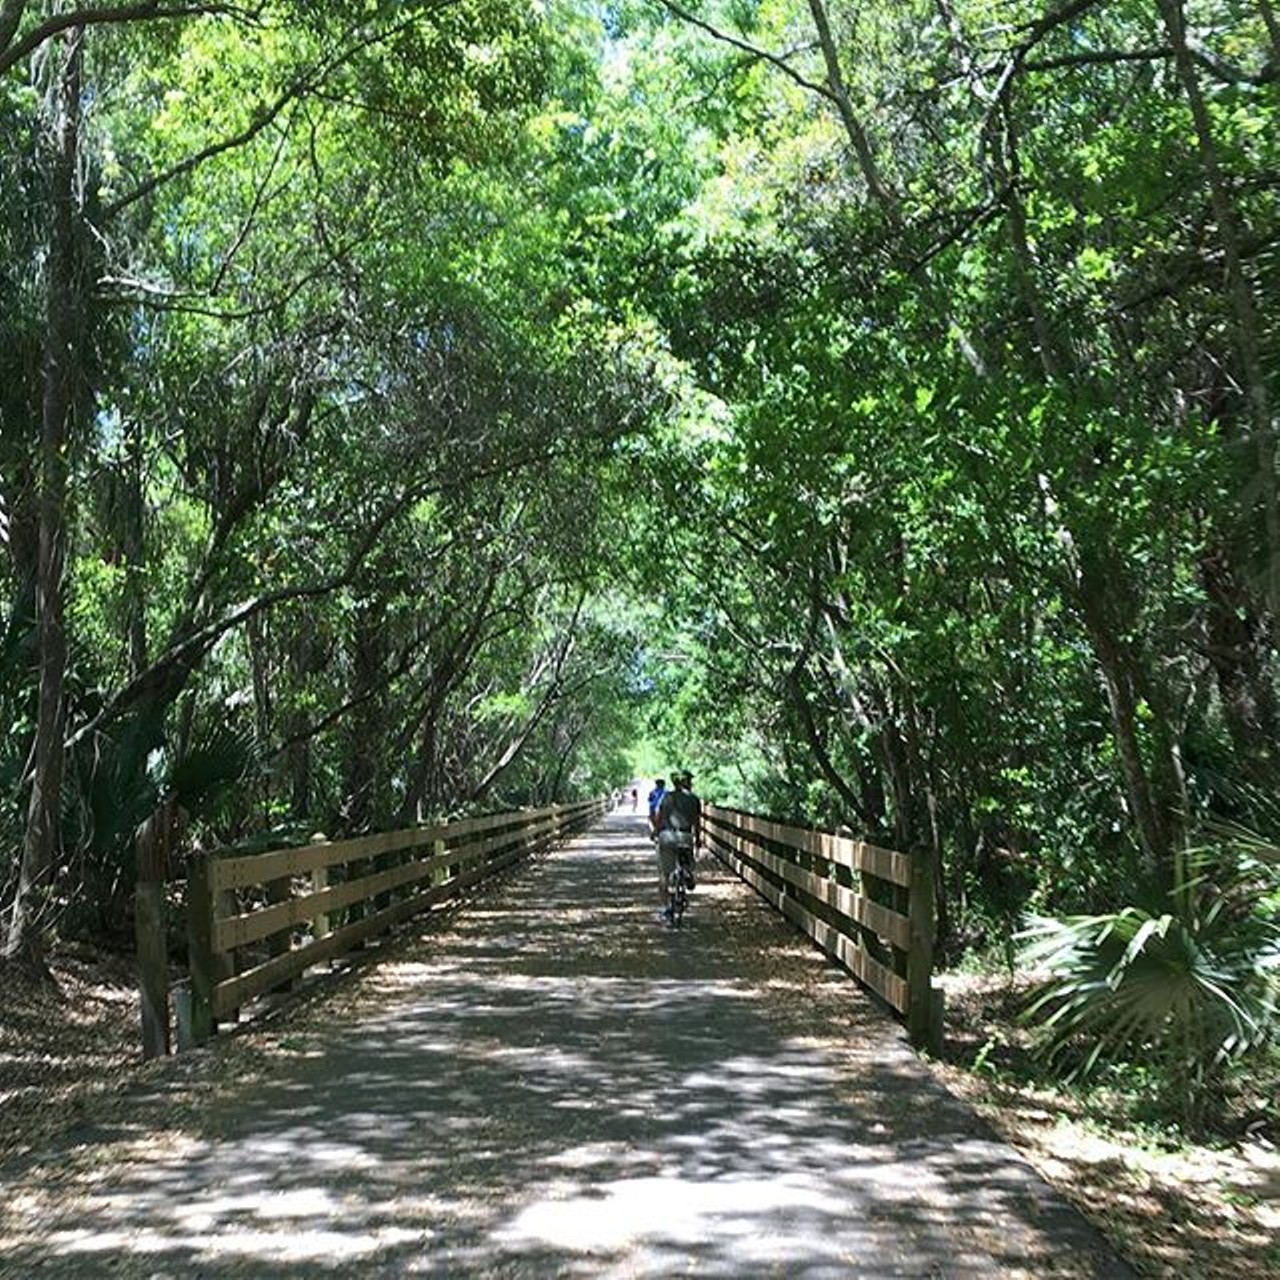 Cross Seminole Trail
This trail travels through Oviedo and Winter Springs. For a pedaling break, Spring Hammock Preserve is an off-road experience.
Photo via msealesm/Instagram